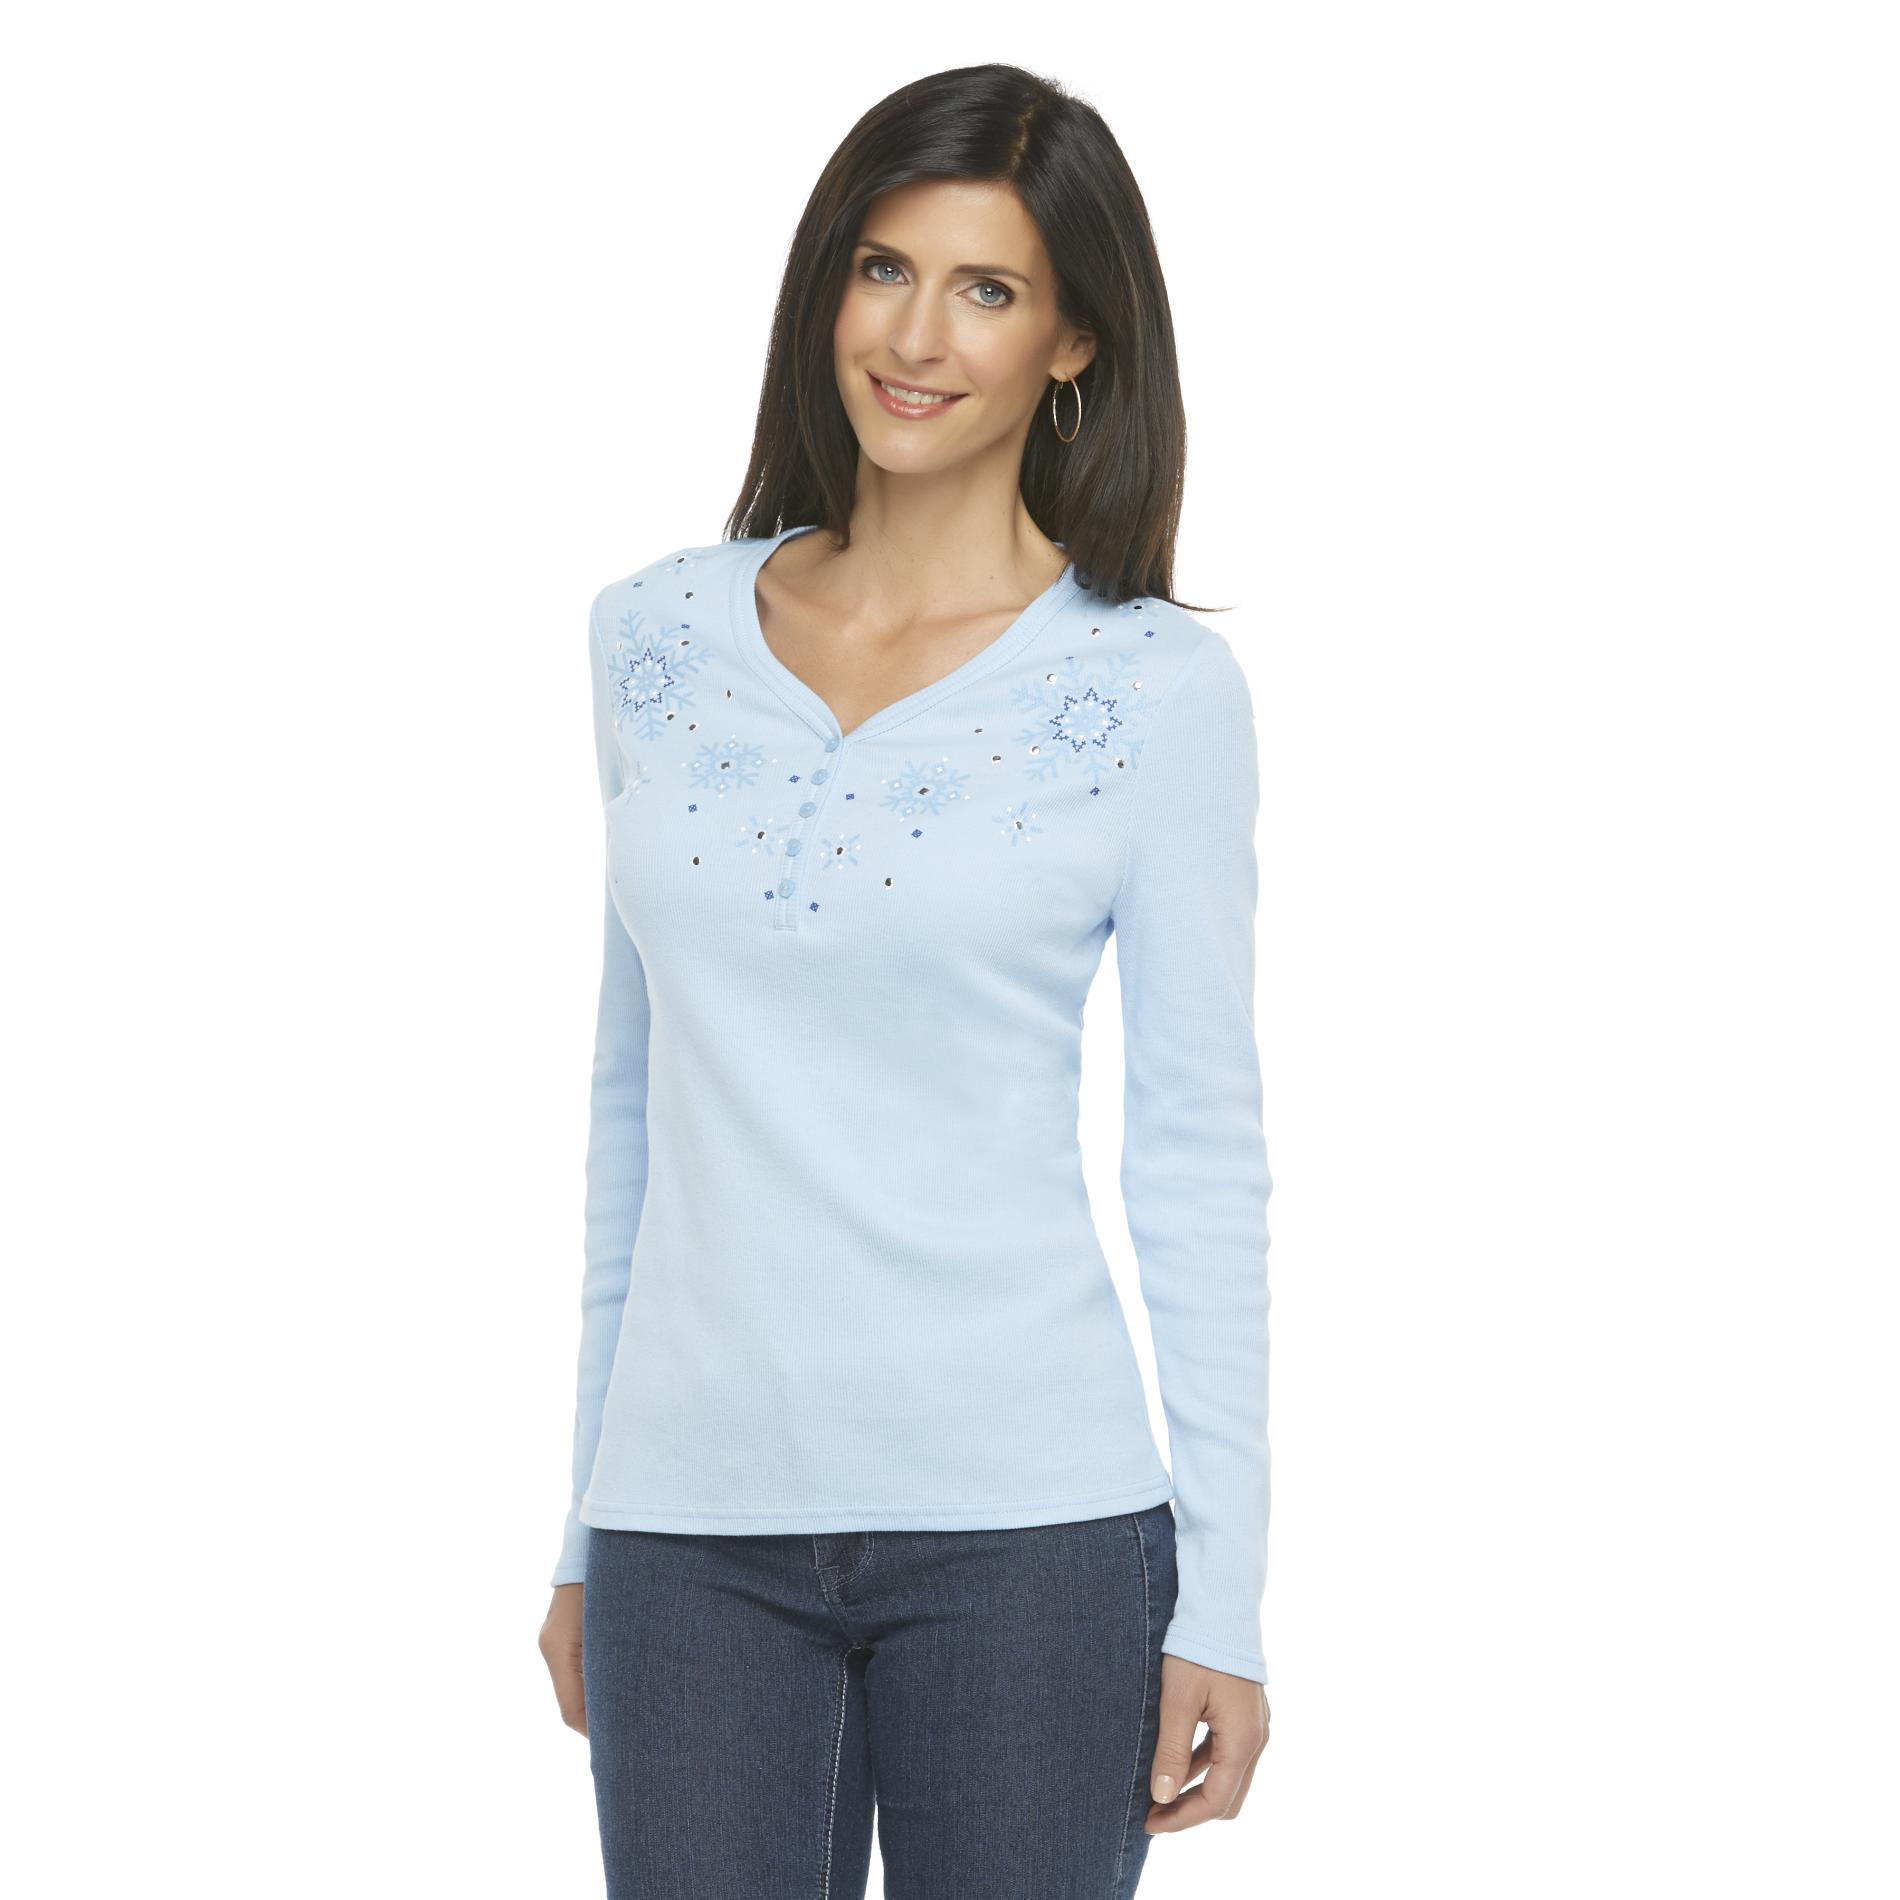 Basic Editions Women's V-Neck Henley Top - Snowflakes